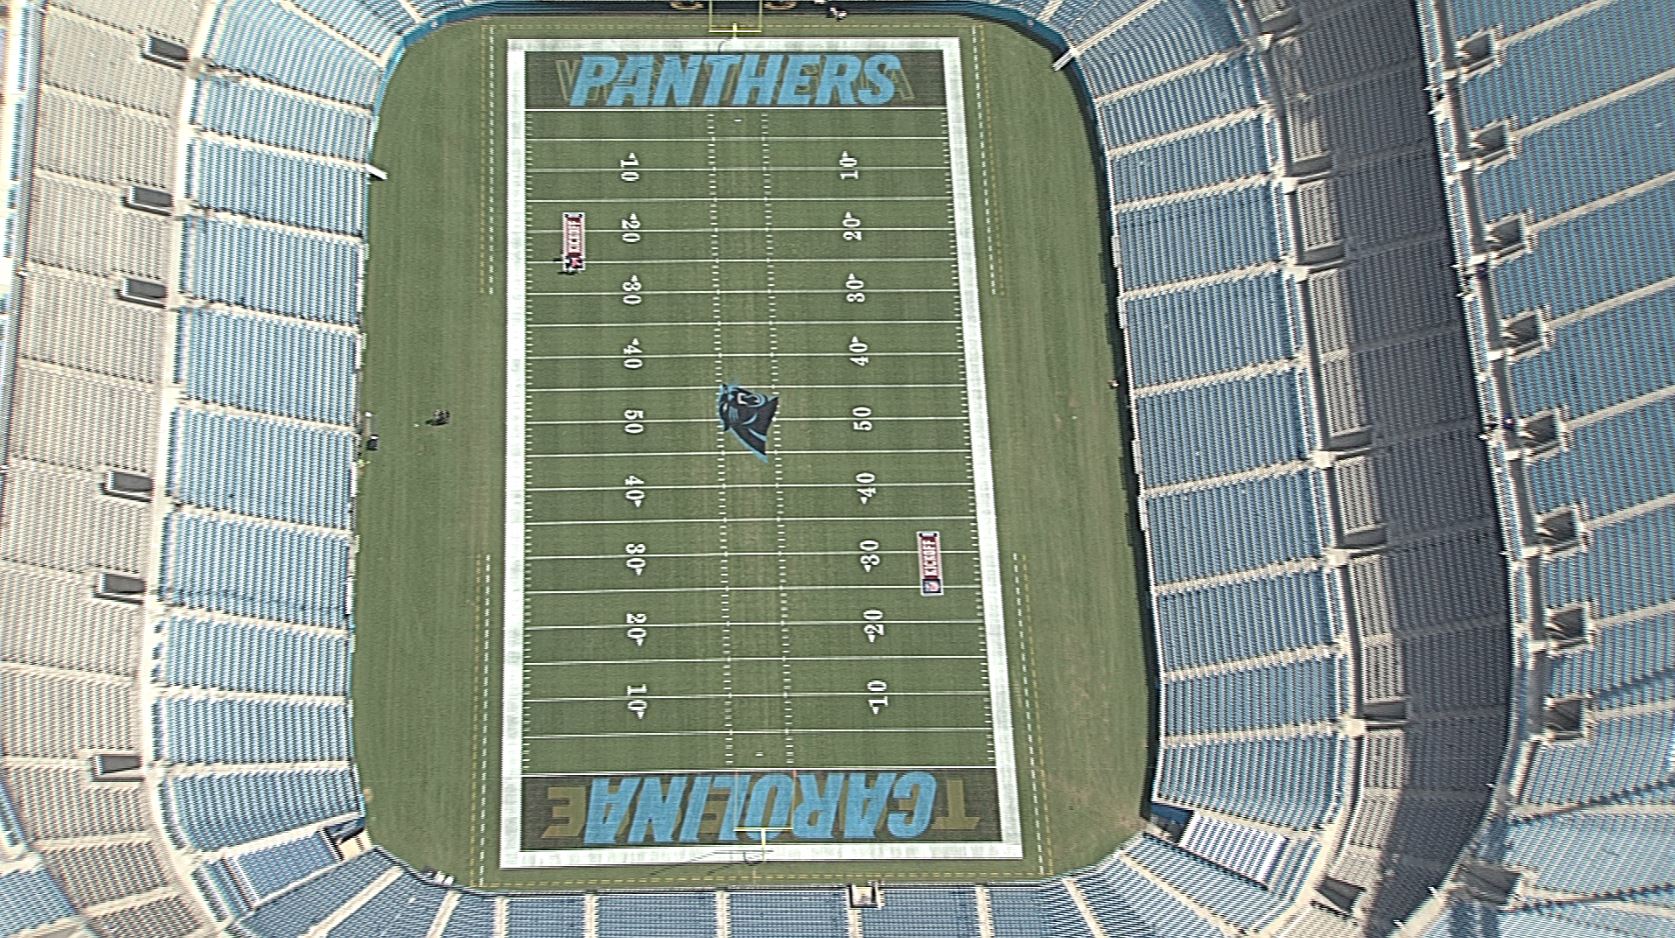 Panthers announce reduced seating capacity for 2020 home games due to  COVID-19 guidelines